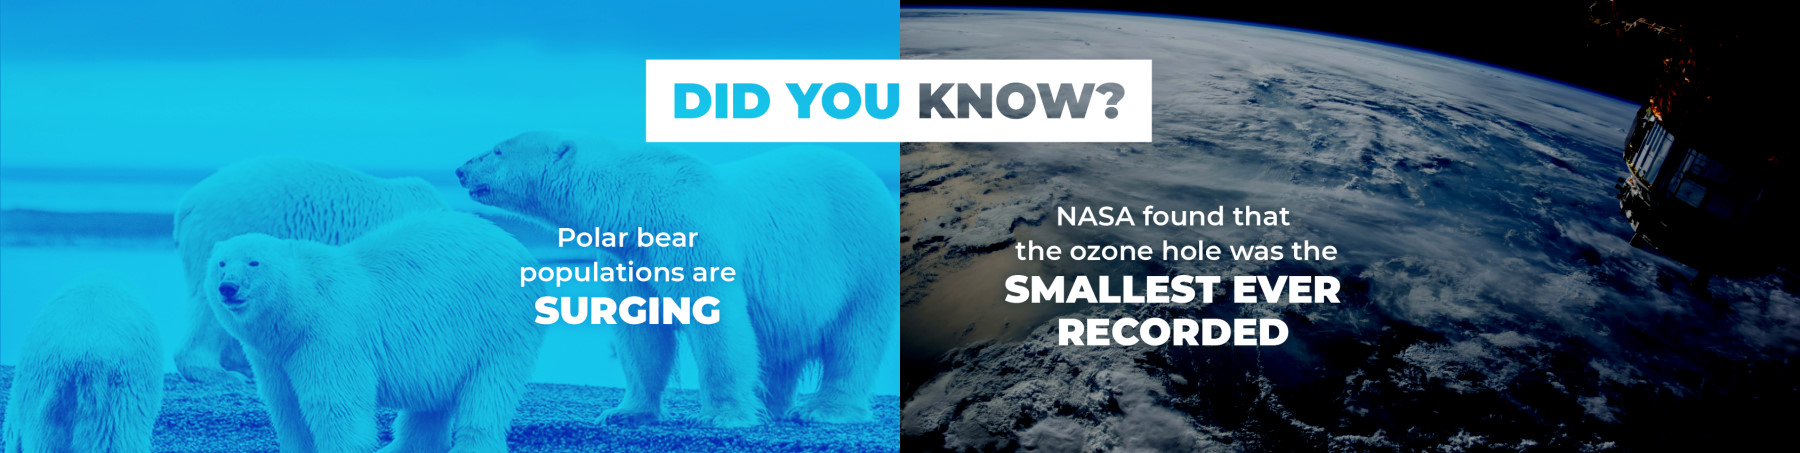 Did you know? Polar bear populations are surging. NASA found that the ozone hole was the smallest ever recorded.